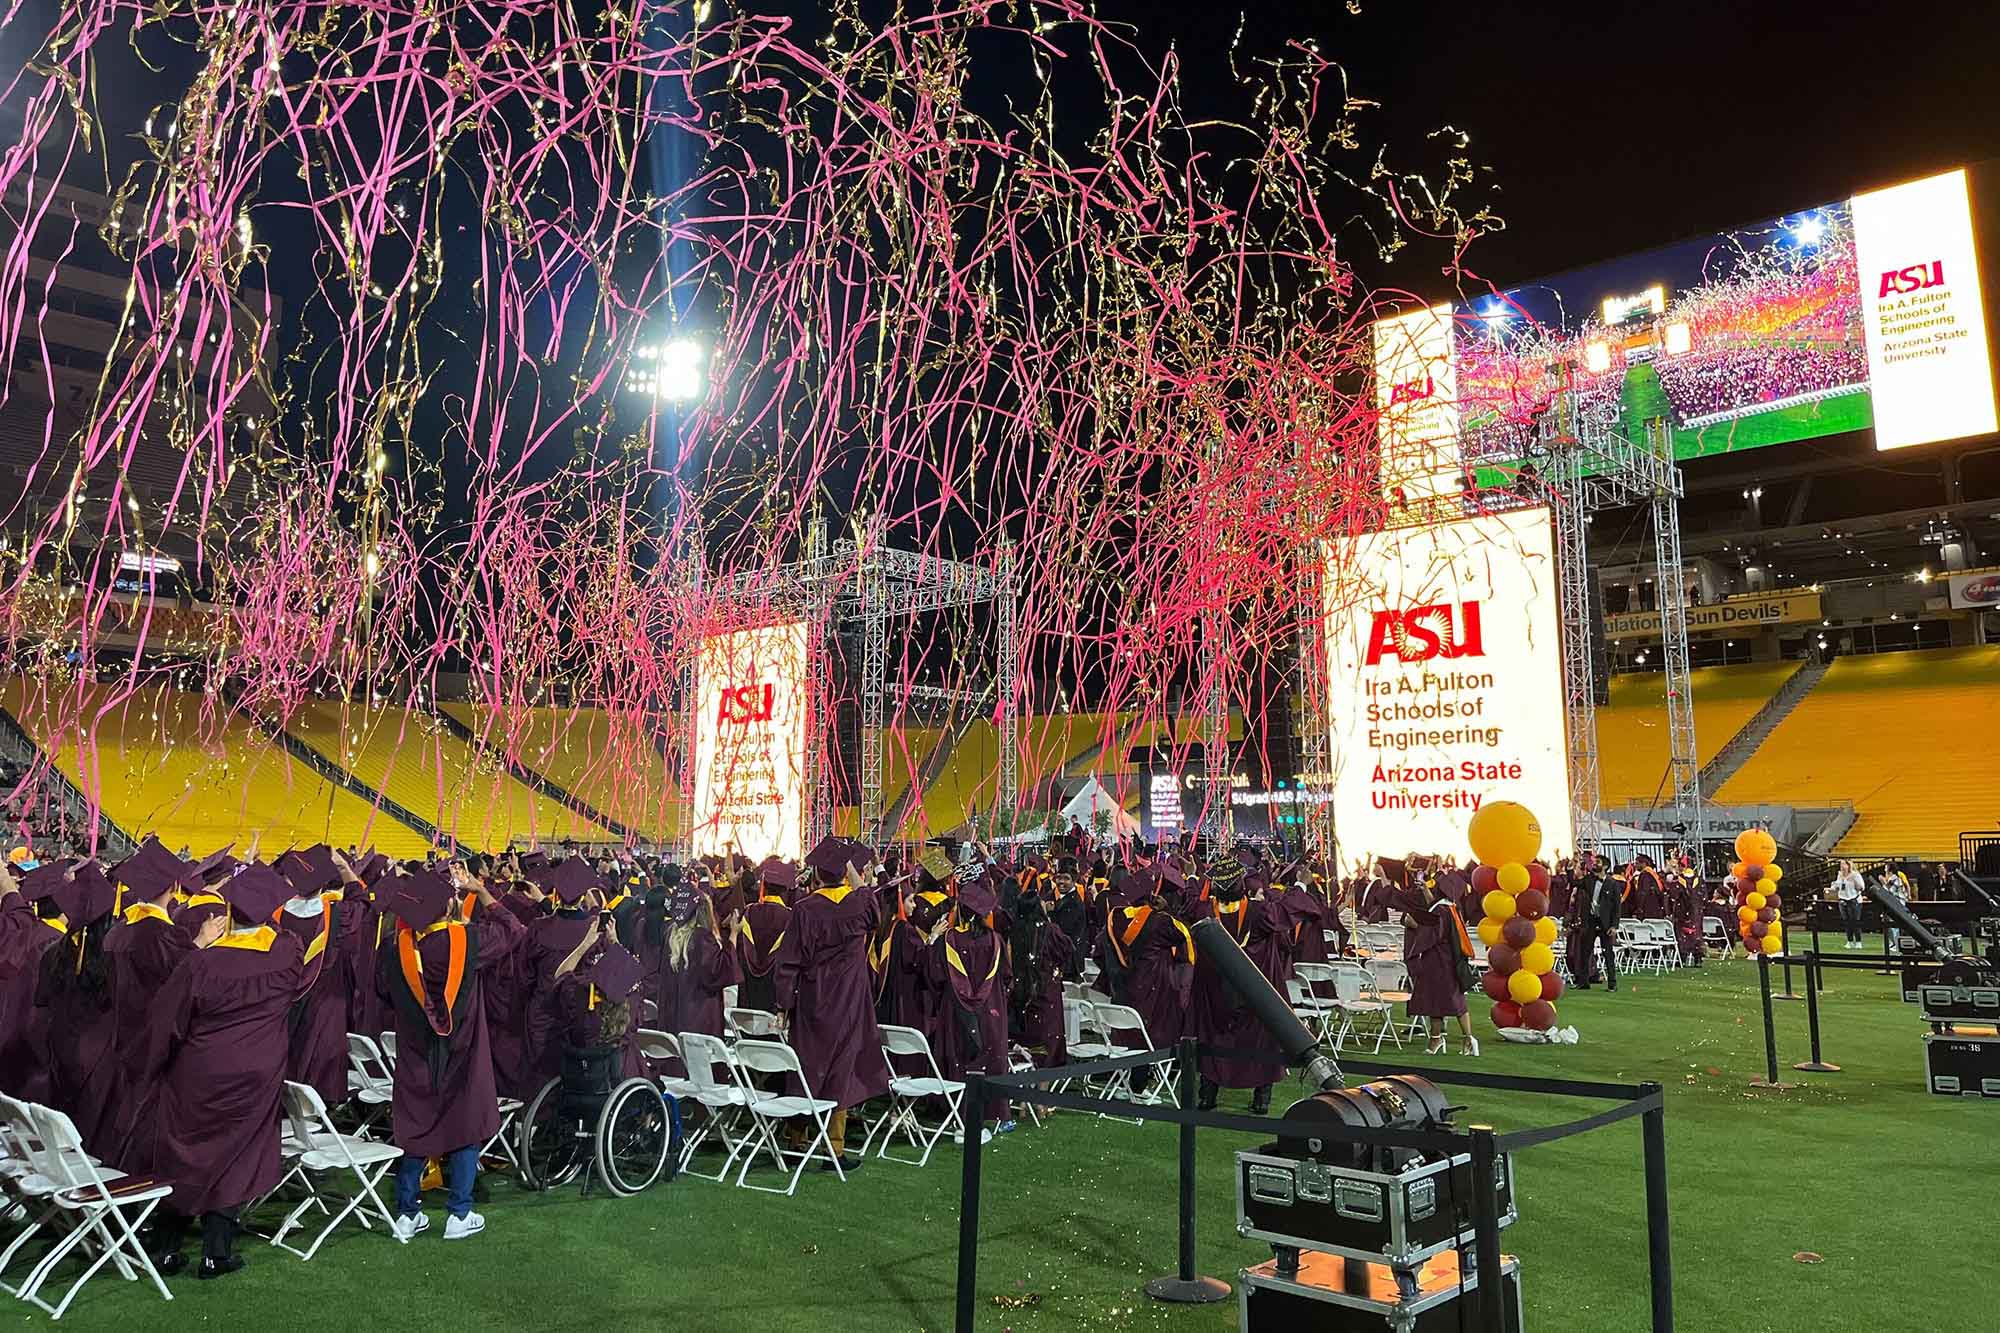 A view within Sun Devil Stadium of the Class of 2023 celebrates the end of their Convocation ceremony. Maroon and gold streamers fill the air, and the crowd is erupting in joy.